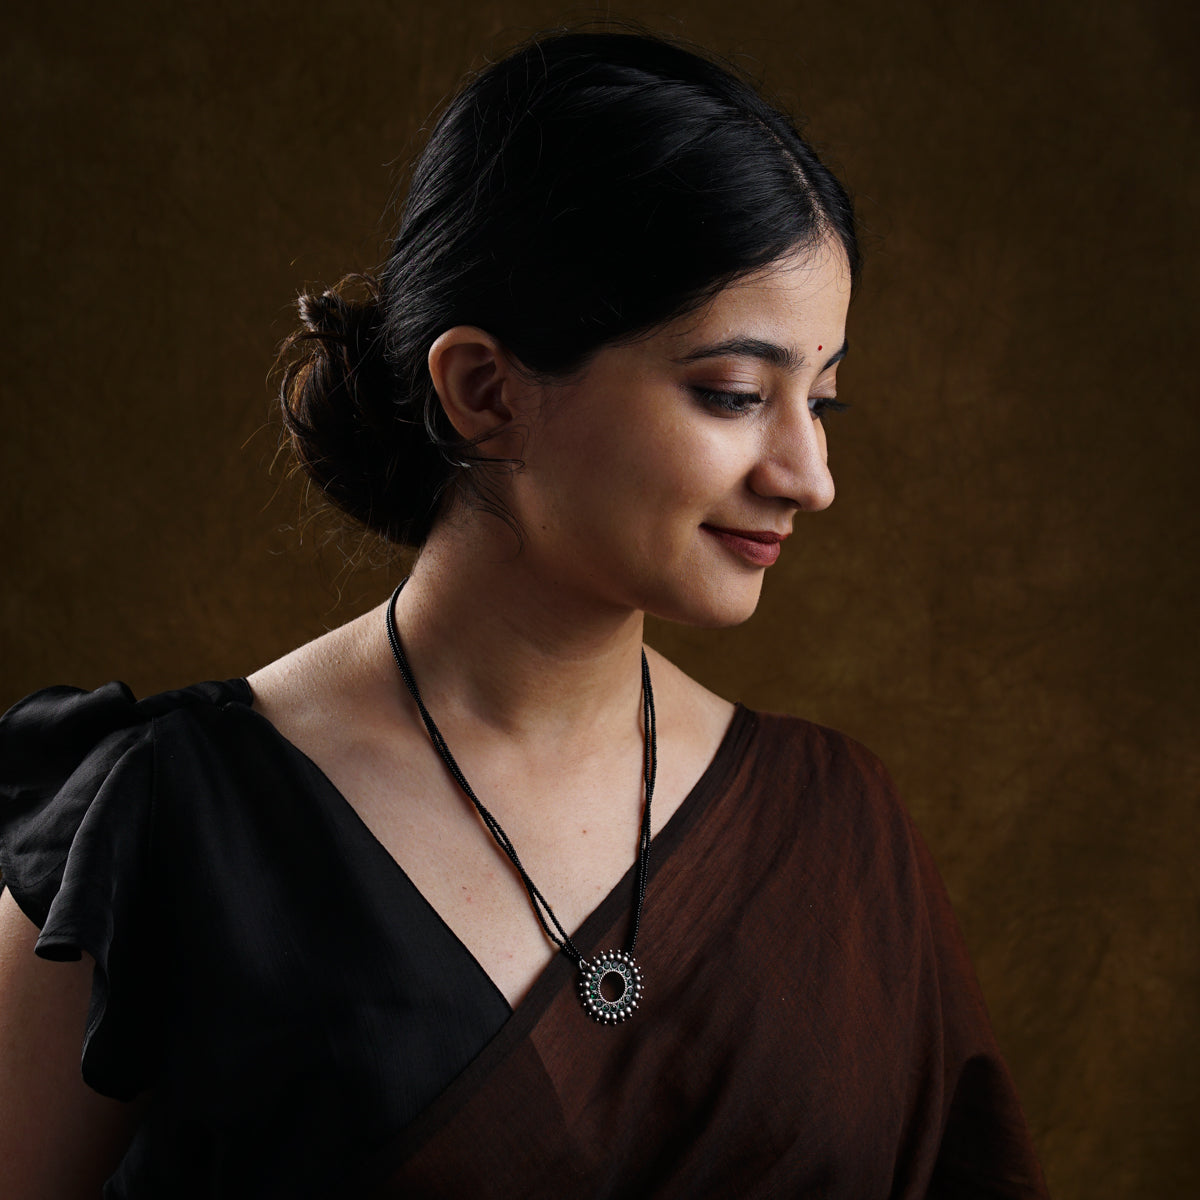 a woman wearing a brown dress and a necklace